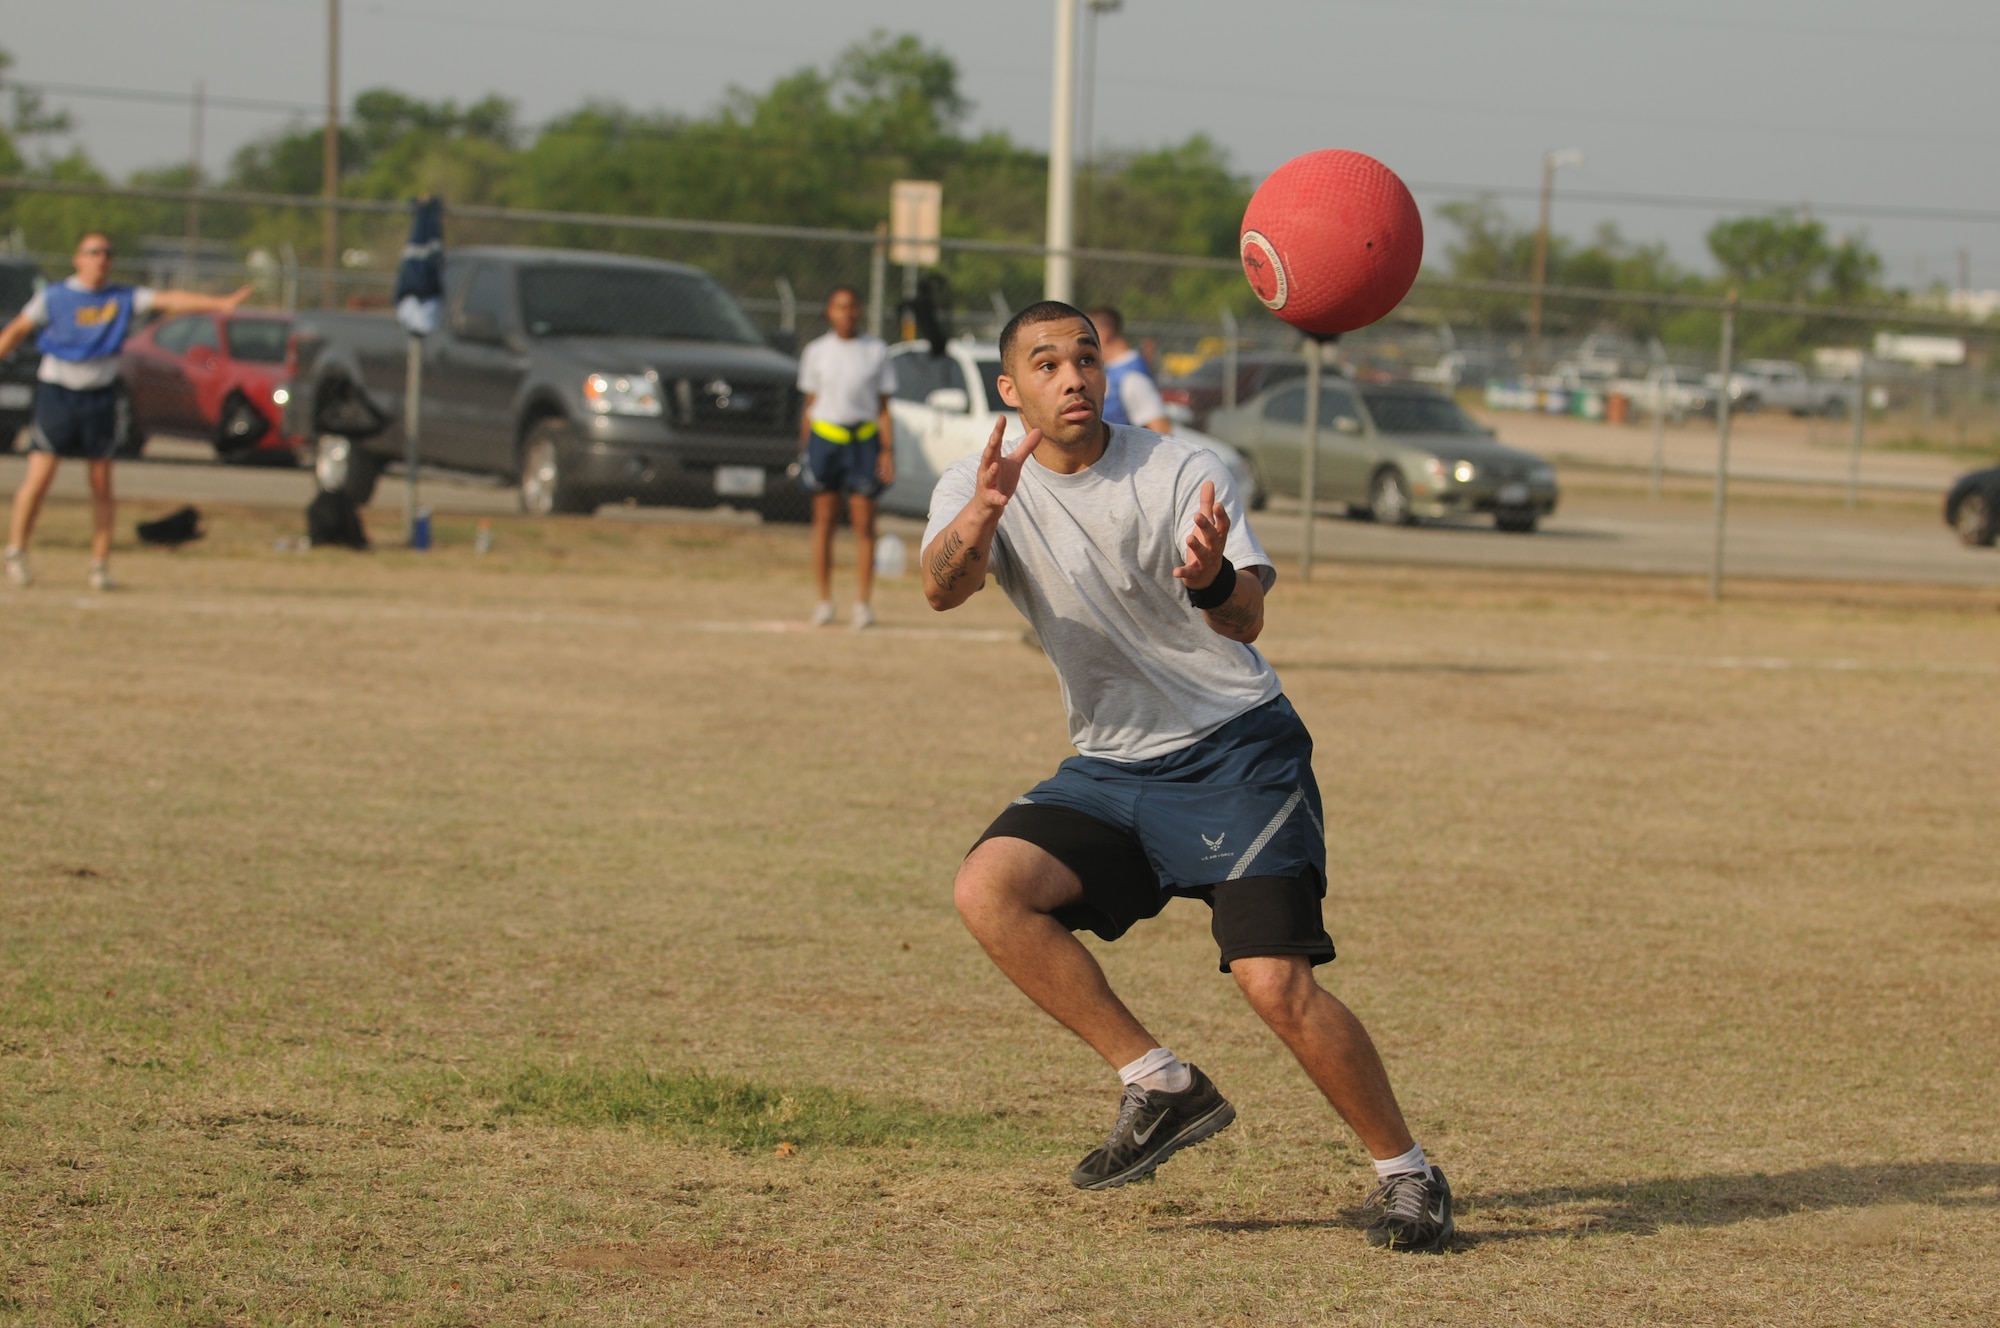 GOODFELLOW AIR FORCE BASE, Texas -- Senior Airman Jamie Brudette, a customer service technician from the 17th Force Support Squadron, catches the ball during a kickball game May 27. Team Goodfellow devoted the day to safety and sports to kick off the 101 critical days of summer. (U.S. Air Force photo/Staff Sgt. Heather L Rodgers)